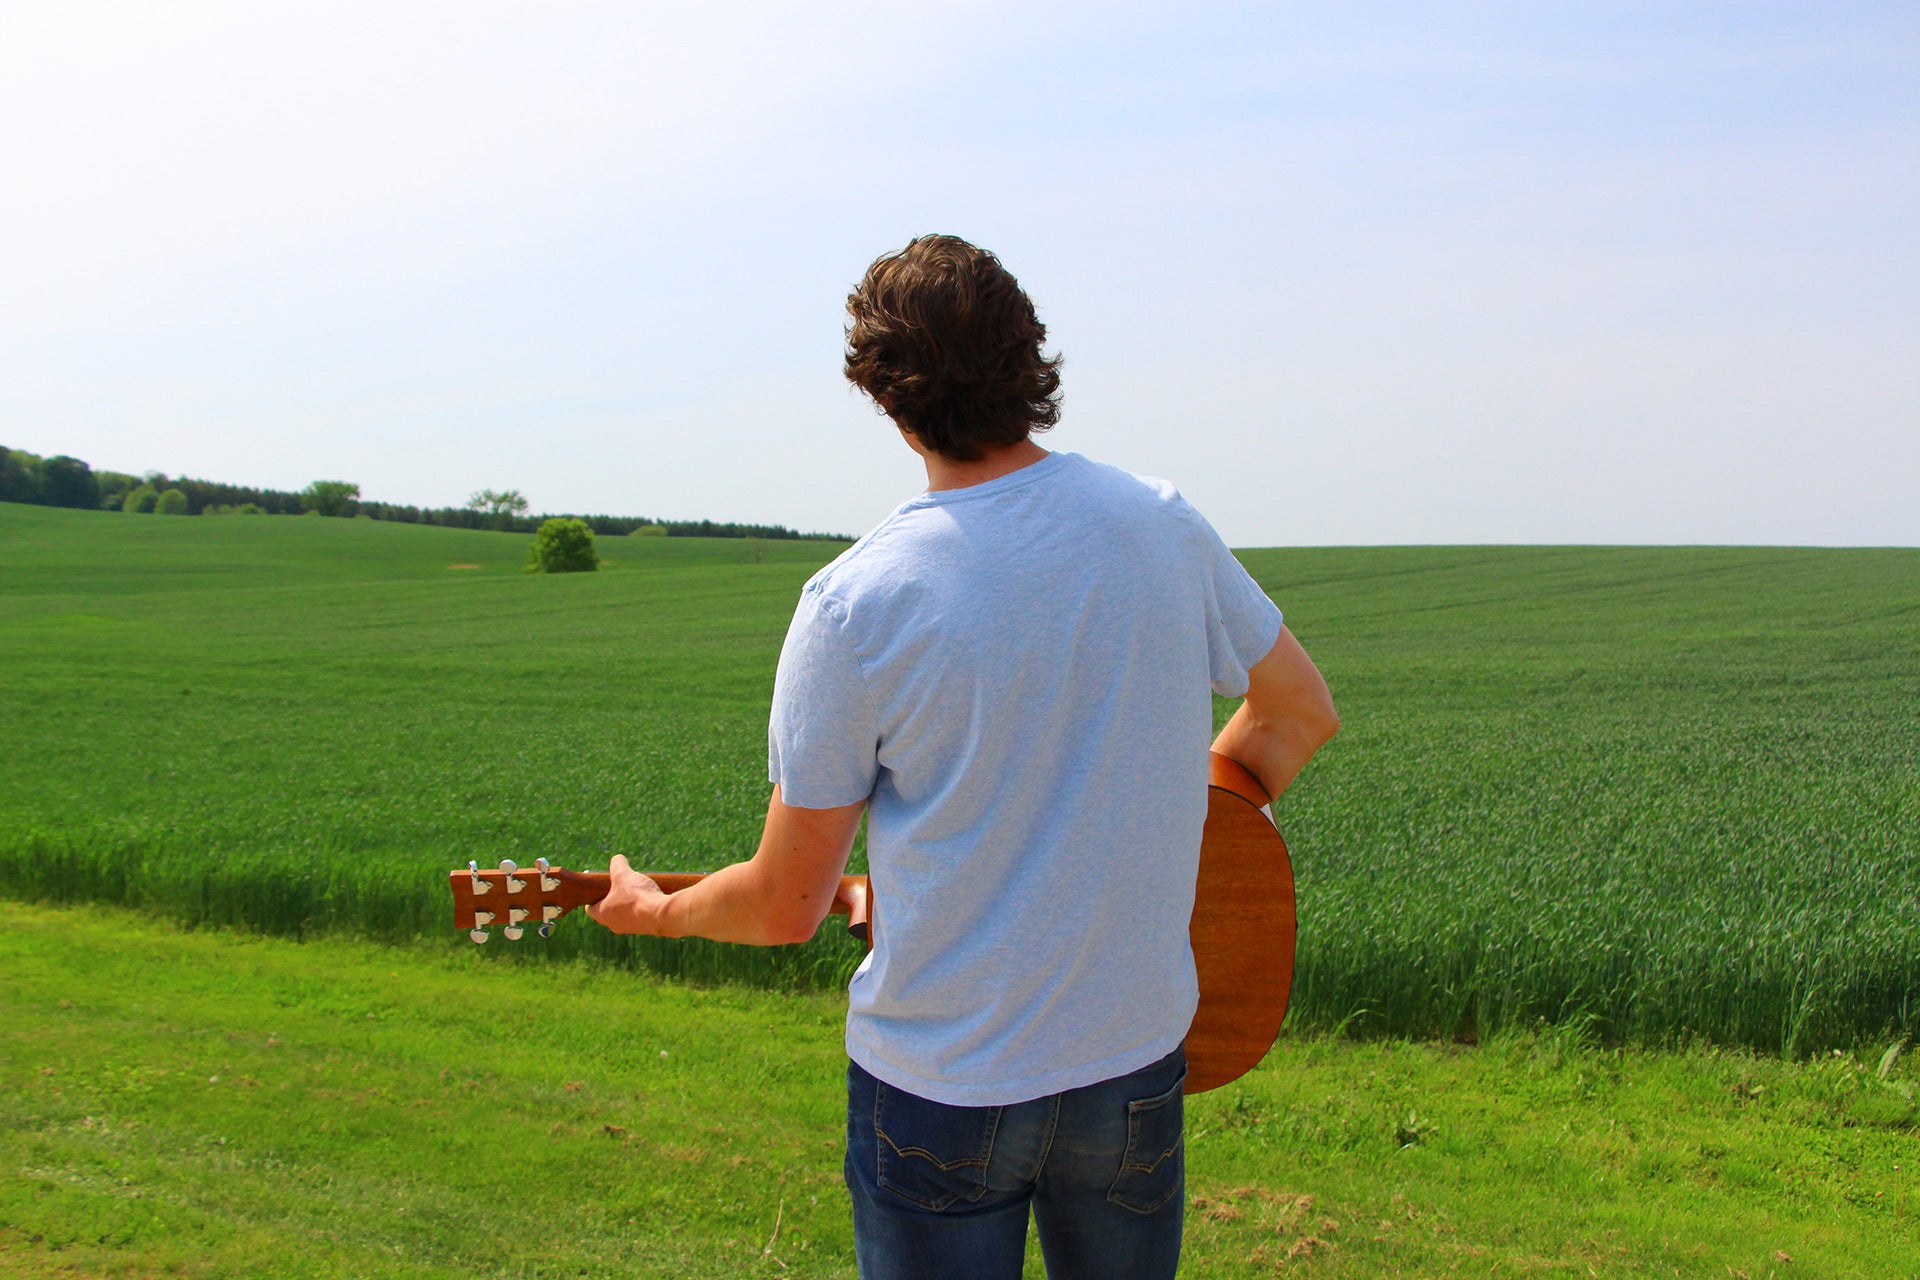 Basil standing in a field playing his guitar